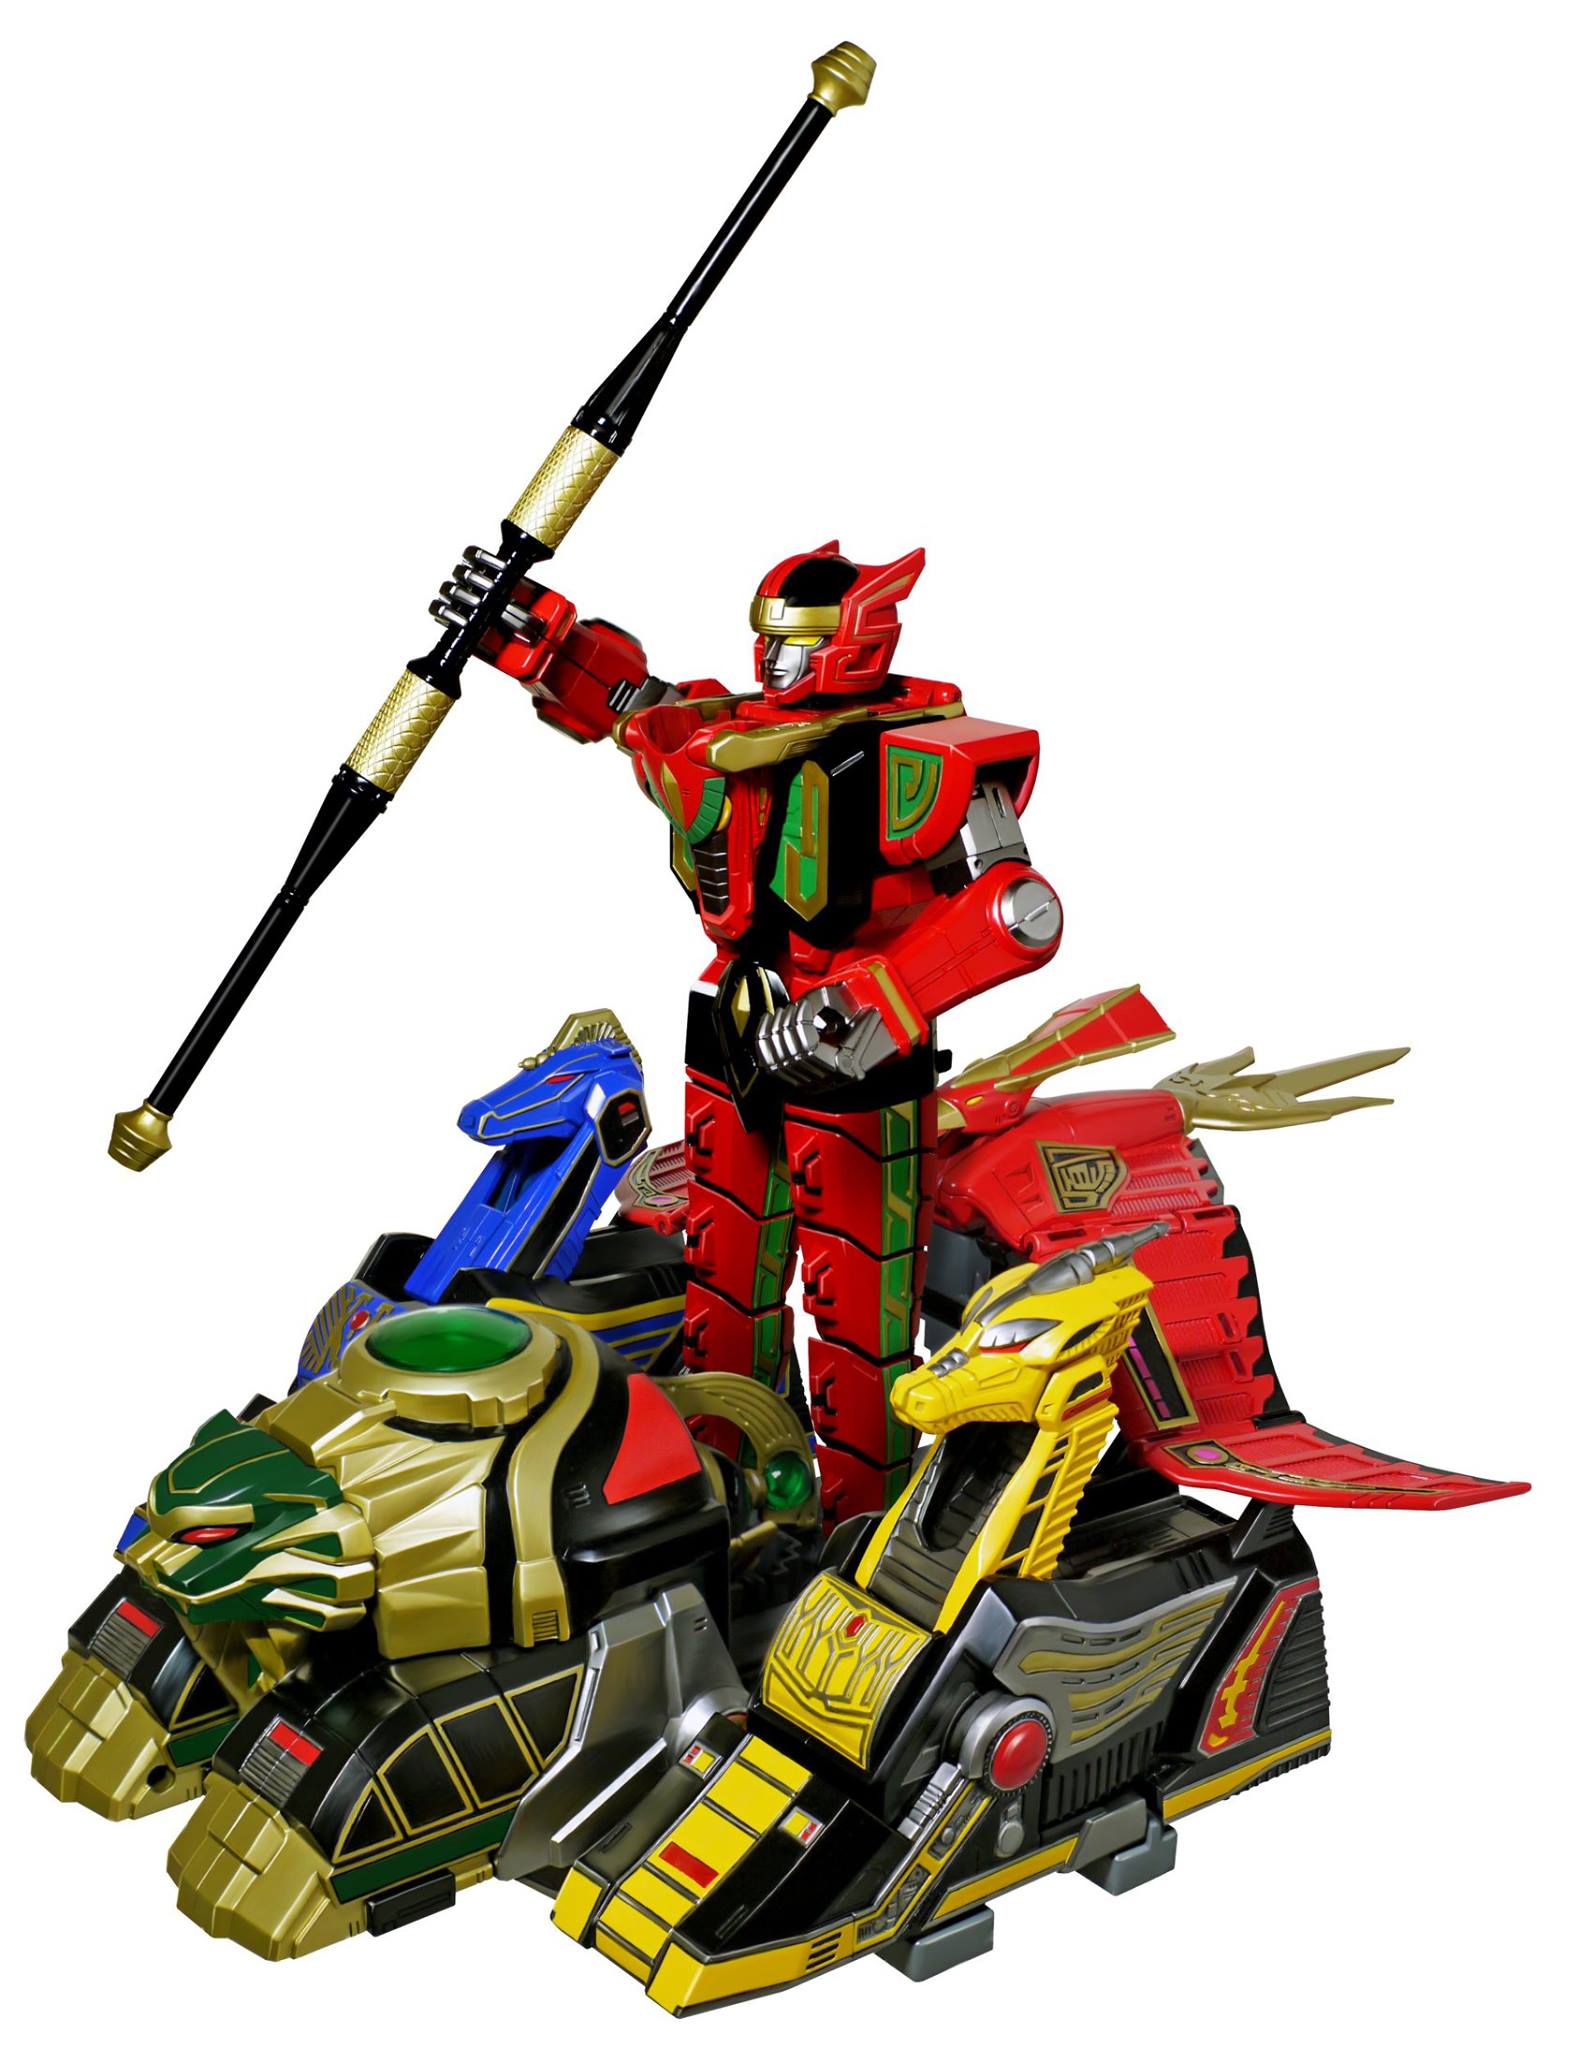 New Images of Mighty Morphin Power Rangers Legacy Thunder Megazord -  Tokunation